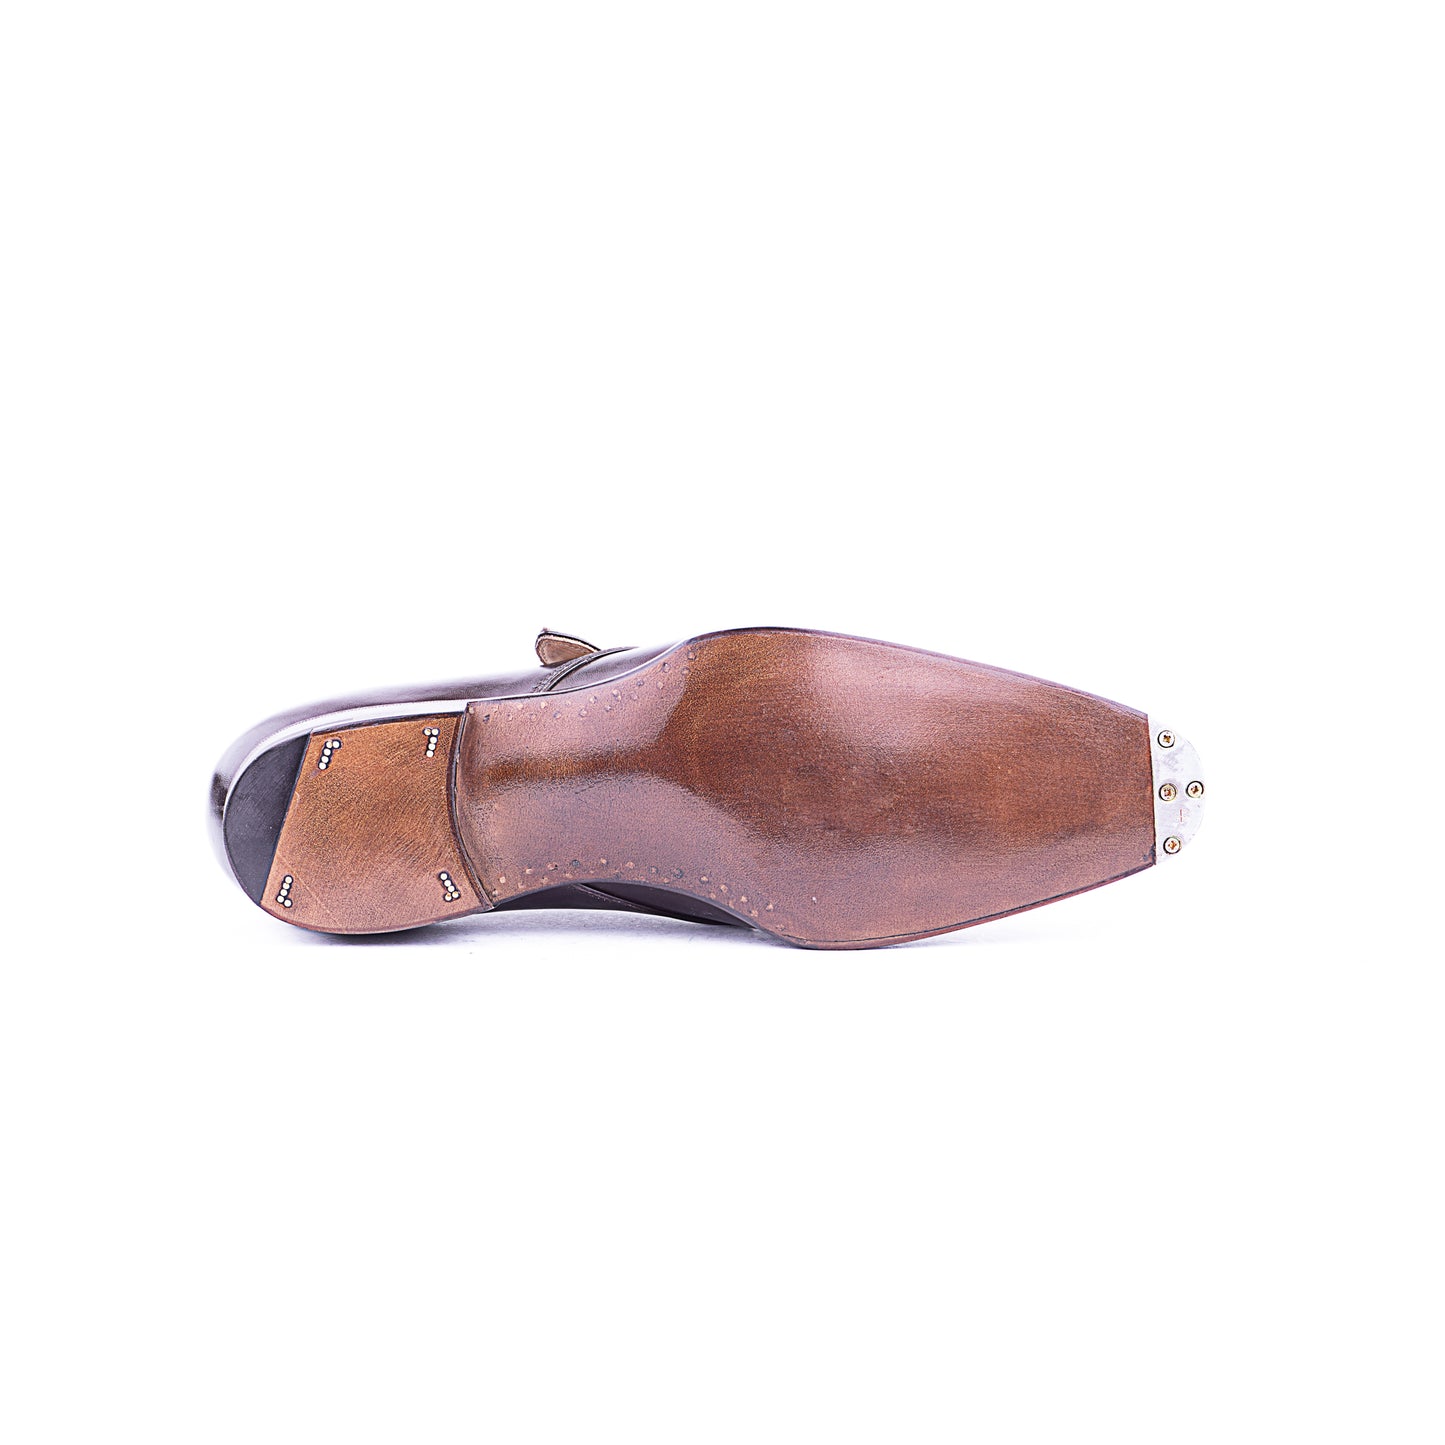 Single buckle Monk with plain tip